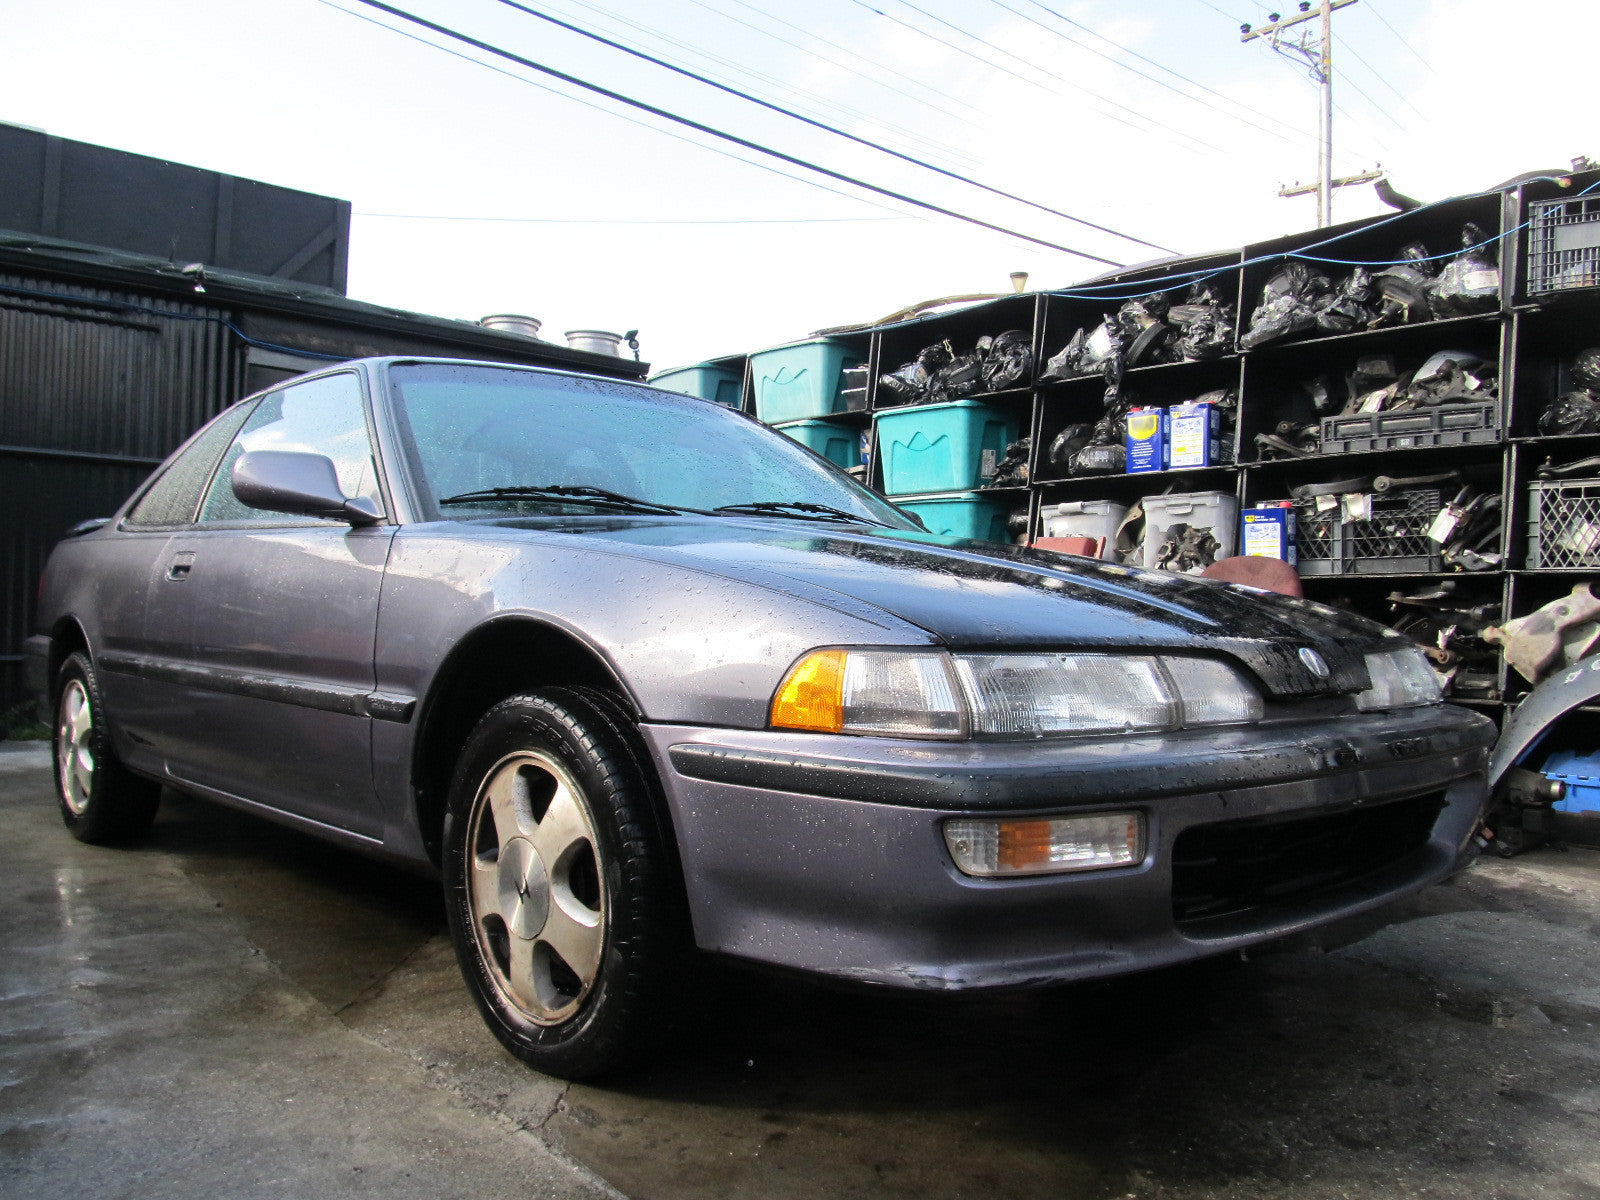 1993 Acura Integra Coupe A/T - Ap1 Project Picture Gallery